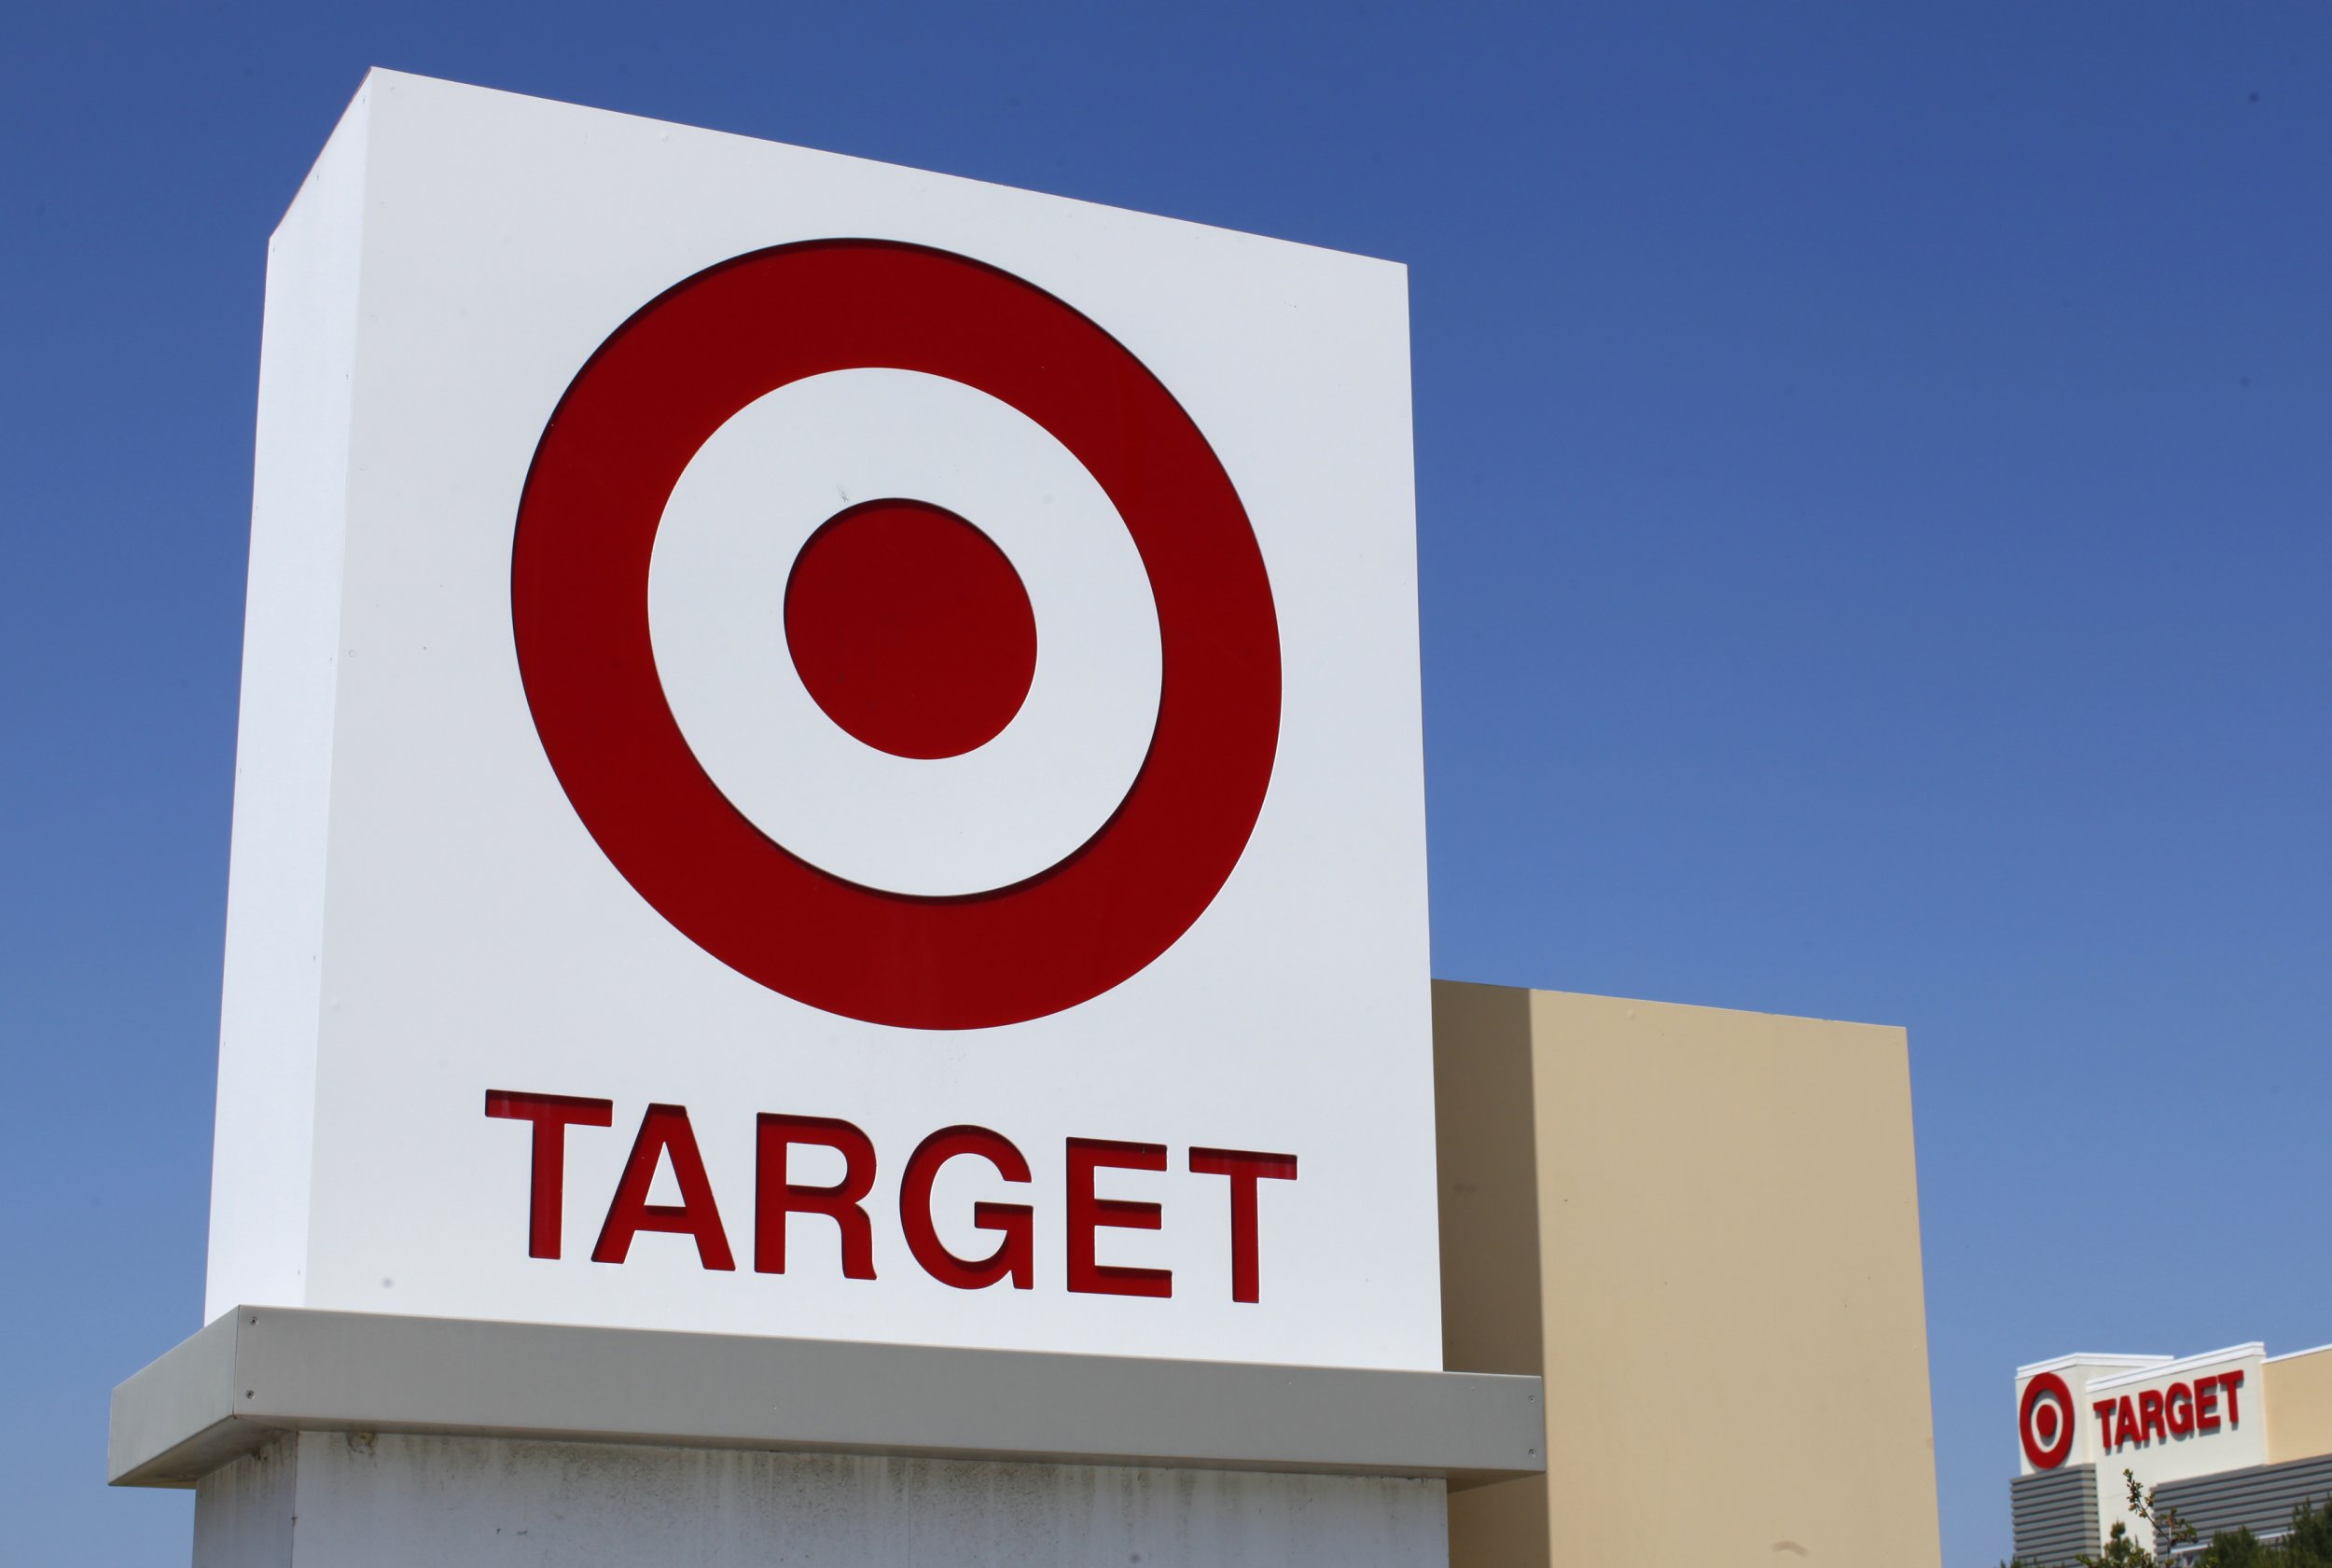 Target's CEO is Out, and Investors Are Nervous